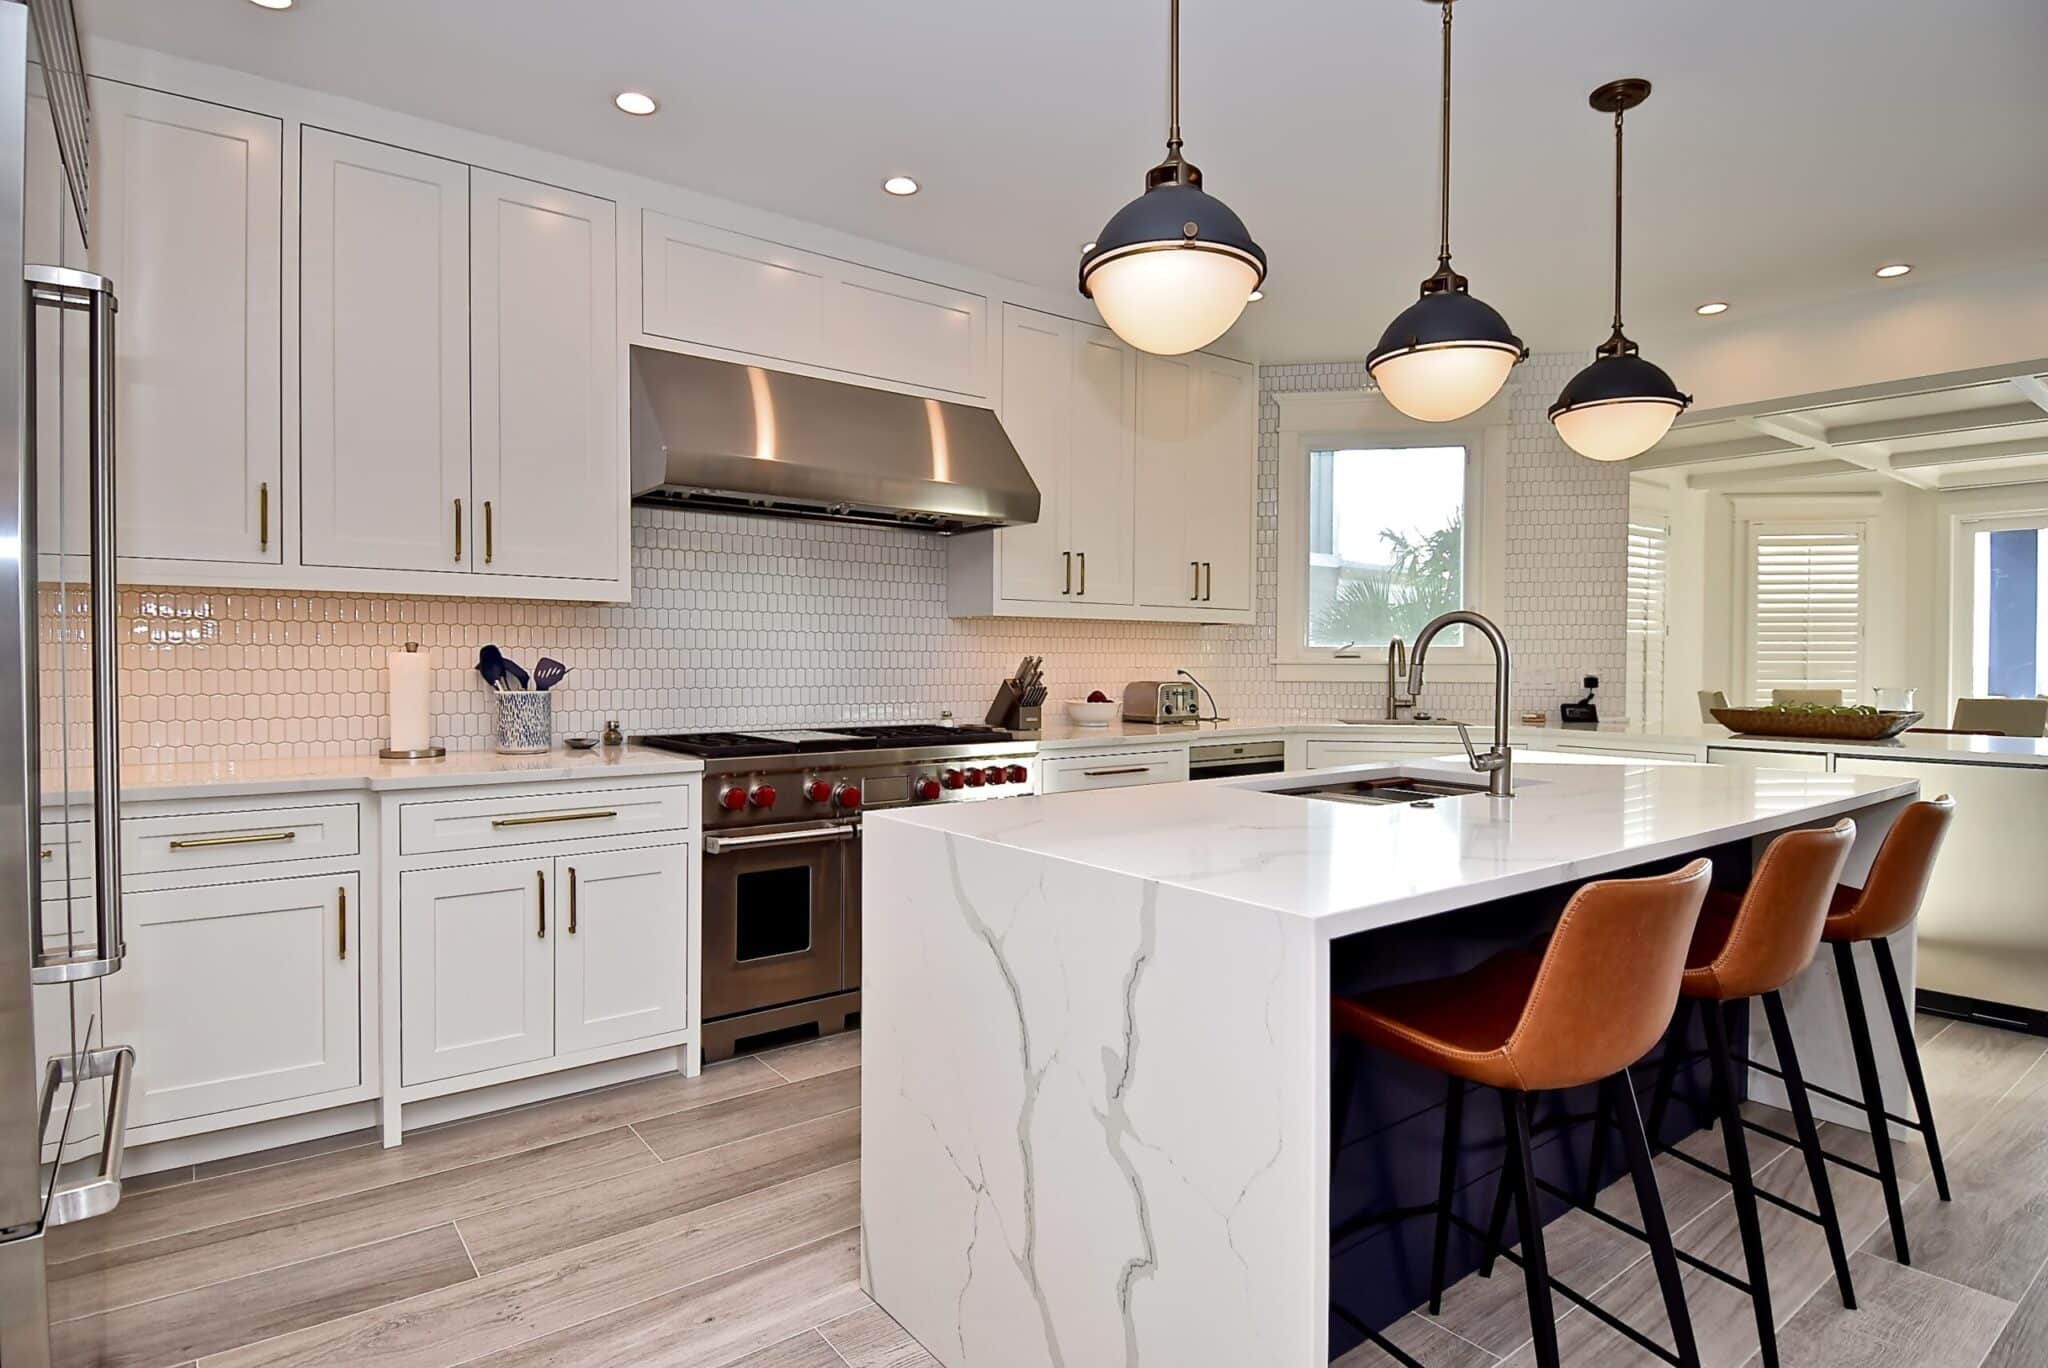 Woodharbor white kitchen cabinets with white countertops